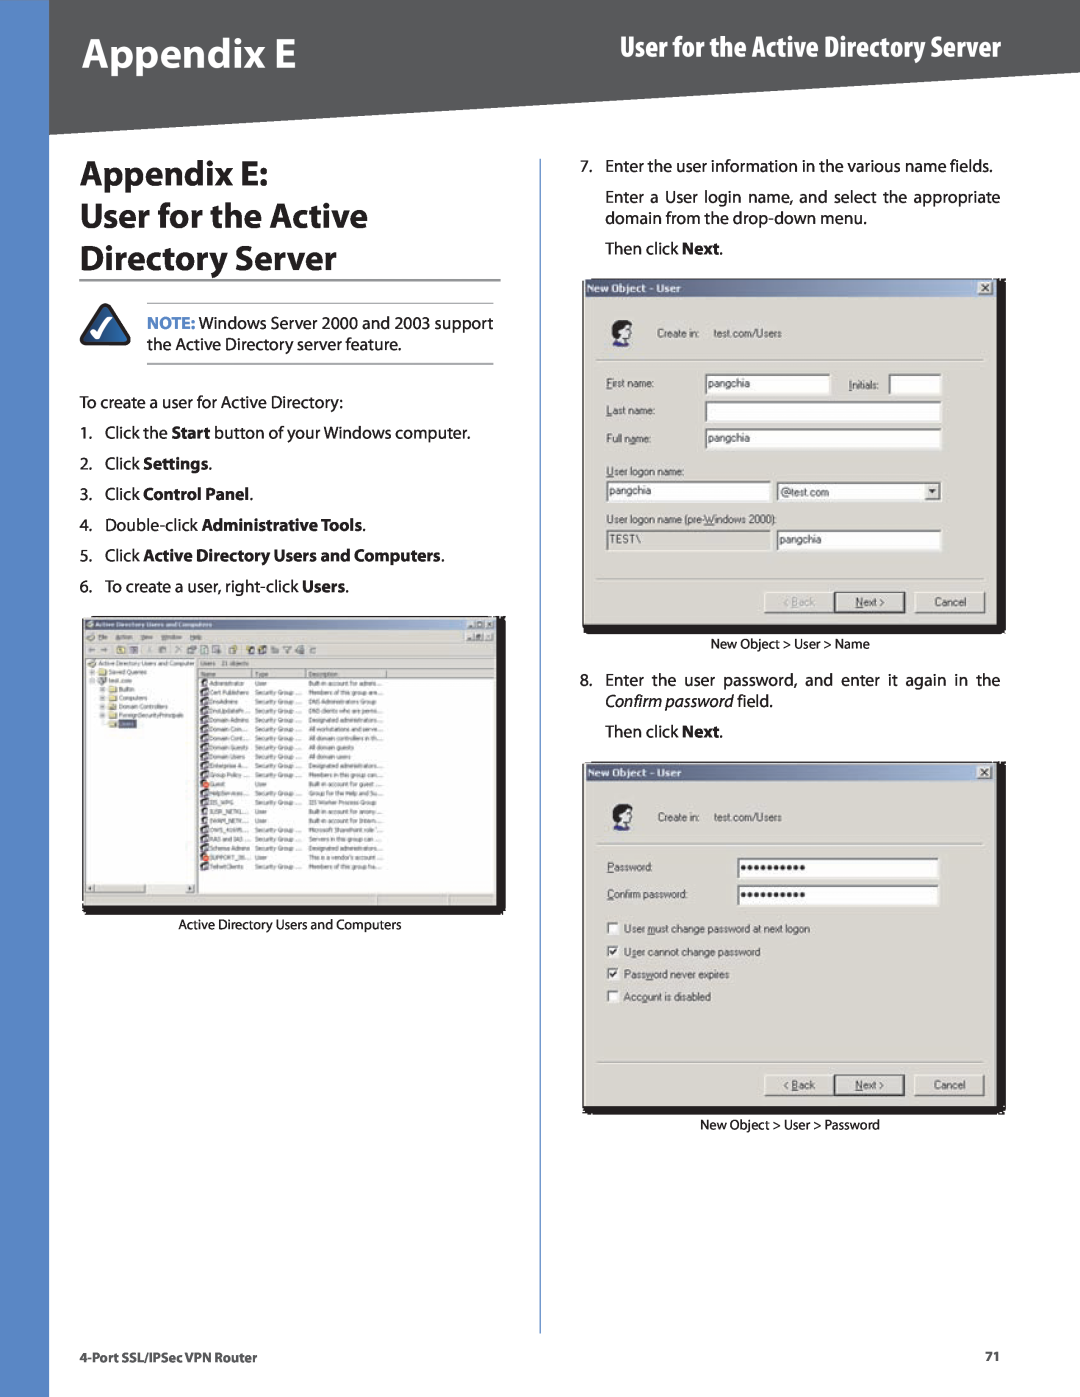 Cisco Systems RVL200 manual Appendix E User for the Active Directory Server, Click Active Directory Users and Computers 